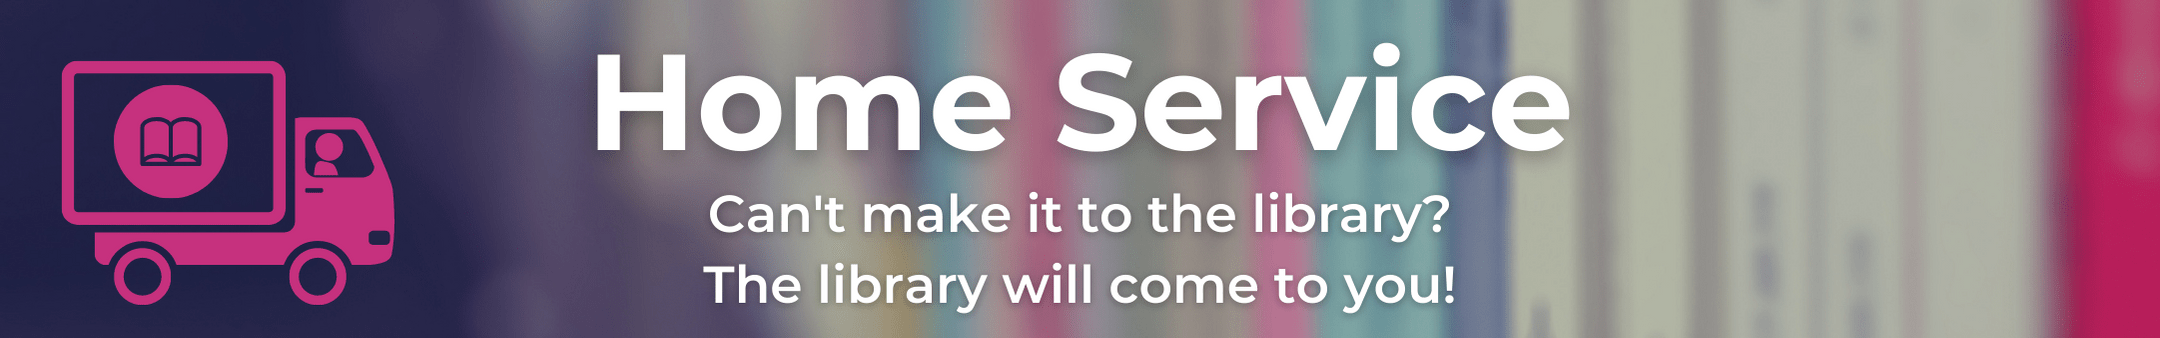 Home Service - Can't make it to the library? The library will come to you!